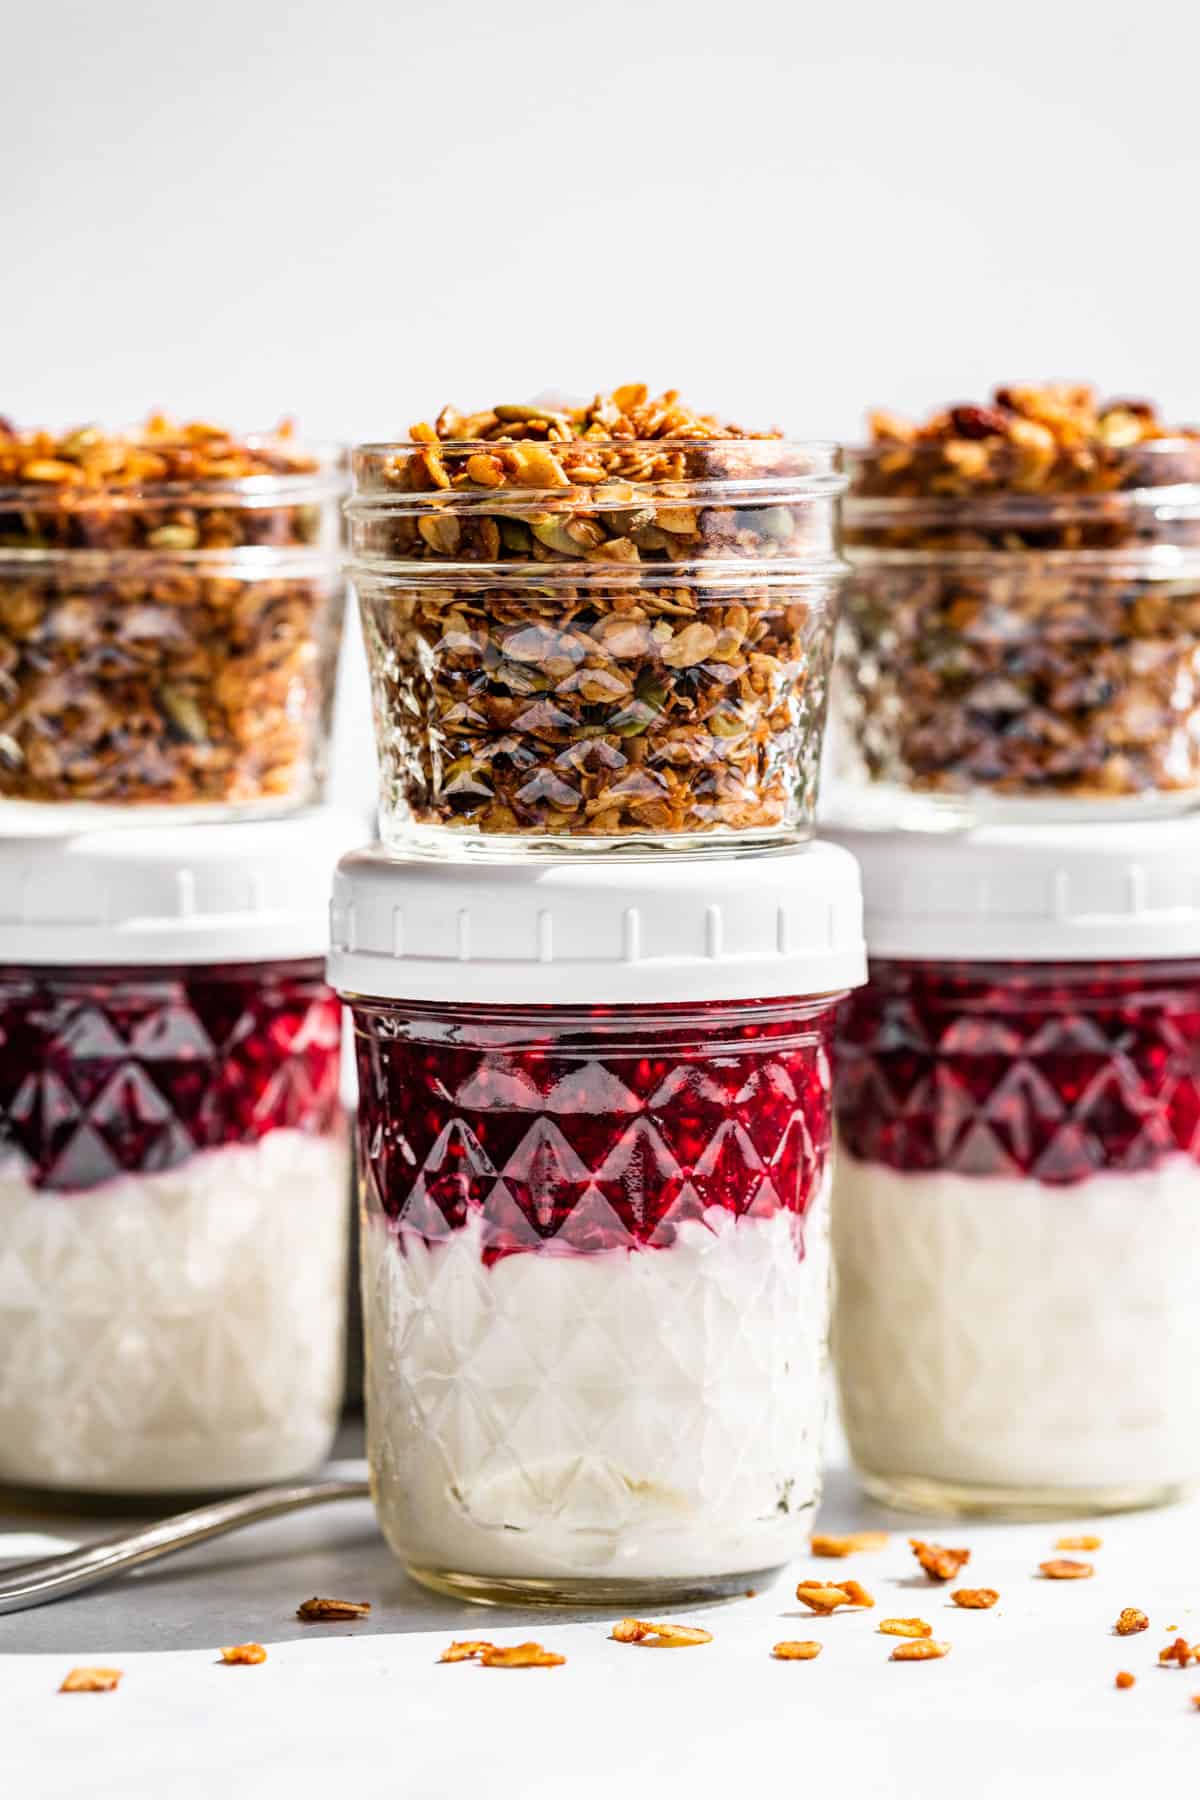 Glass jars with yogurt and berry sauce with small jars of granola on the side.